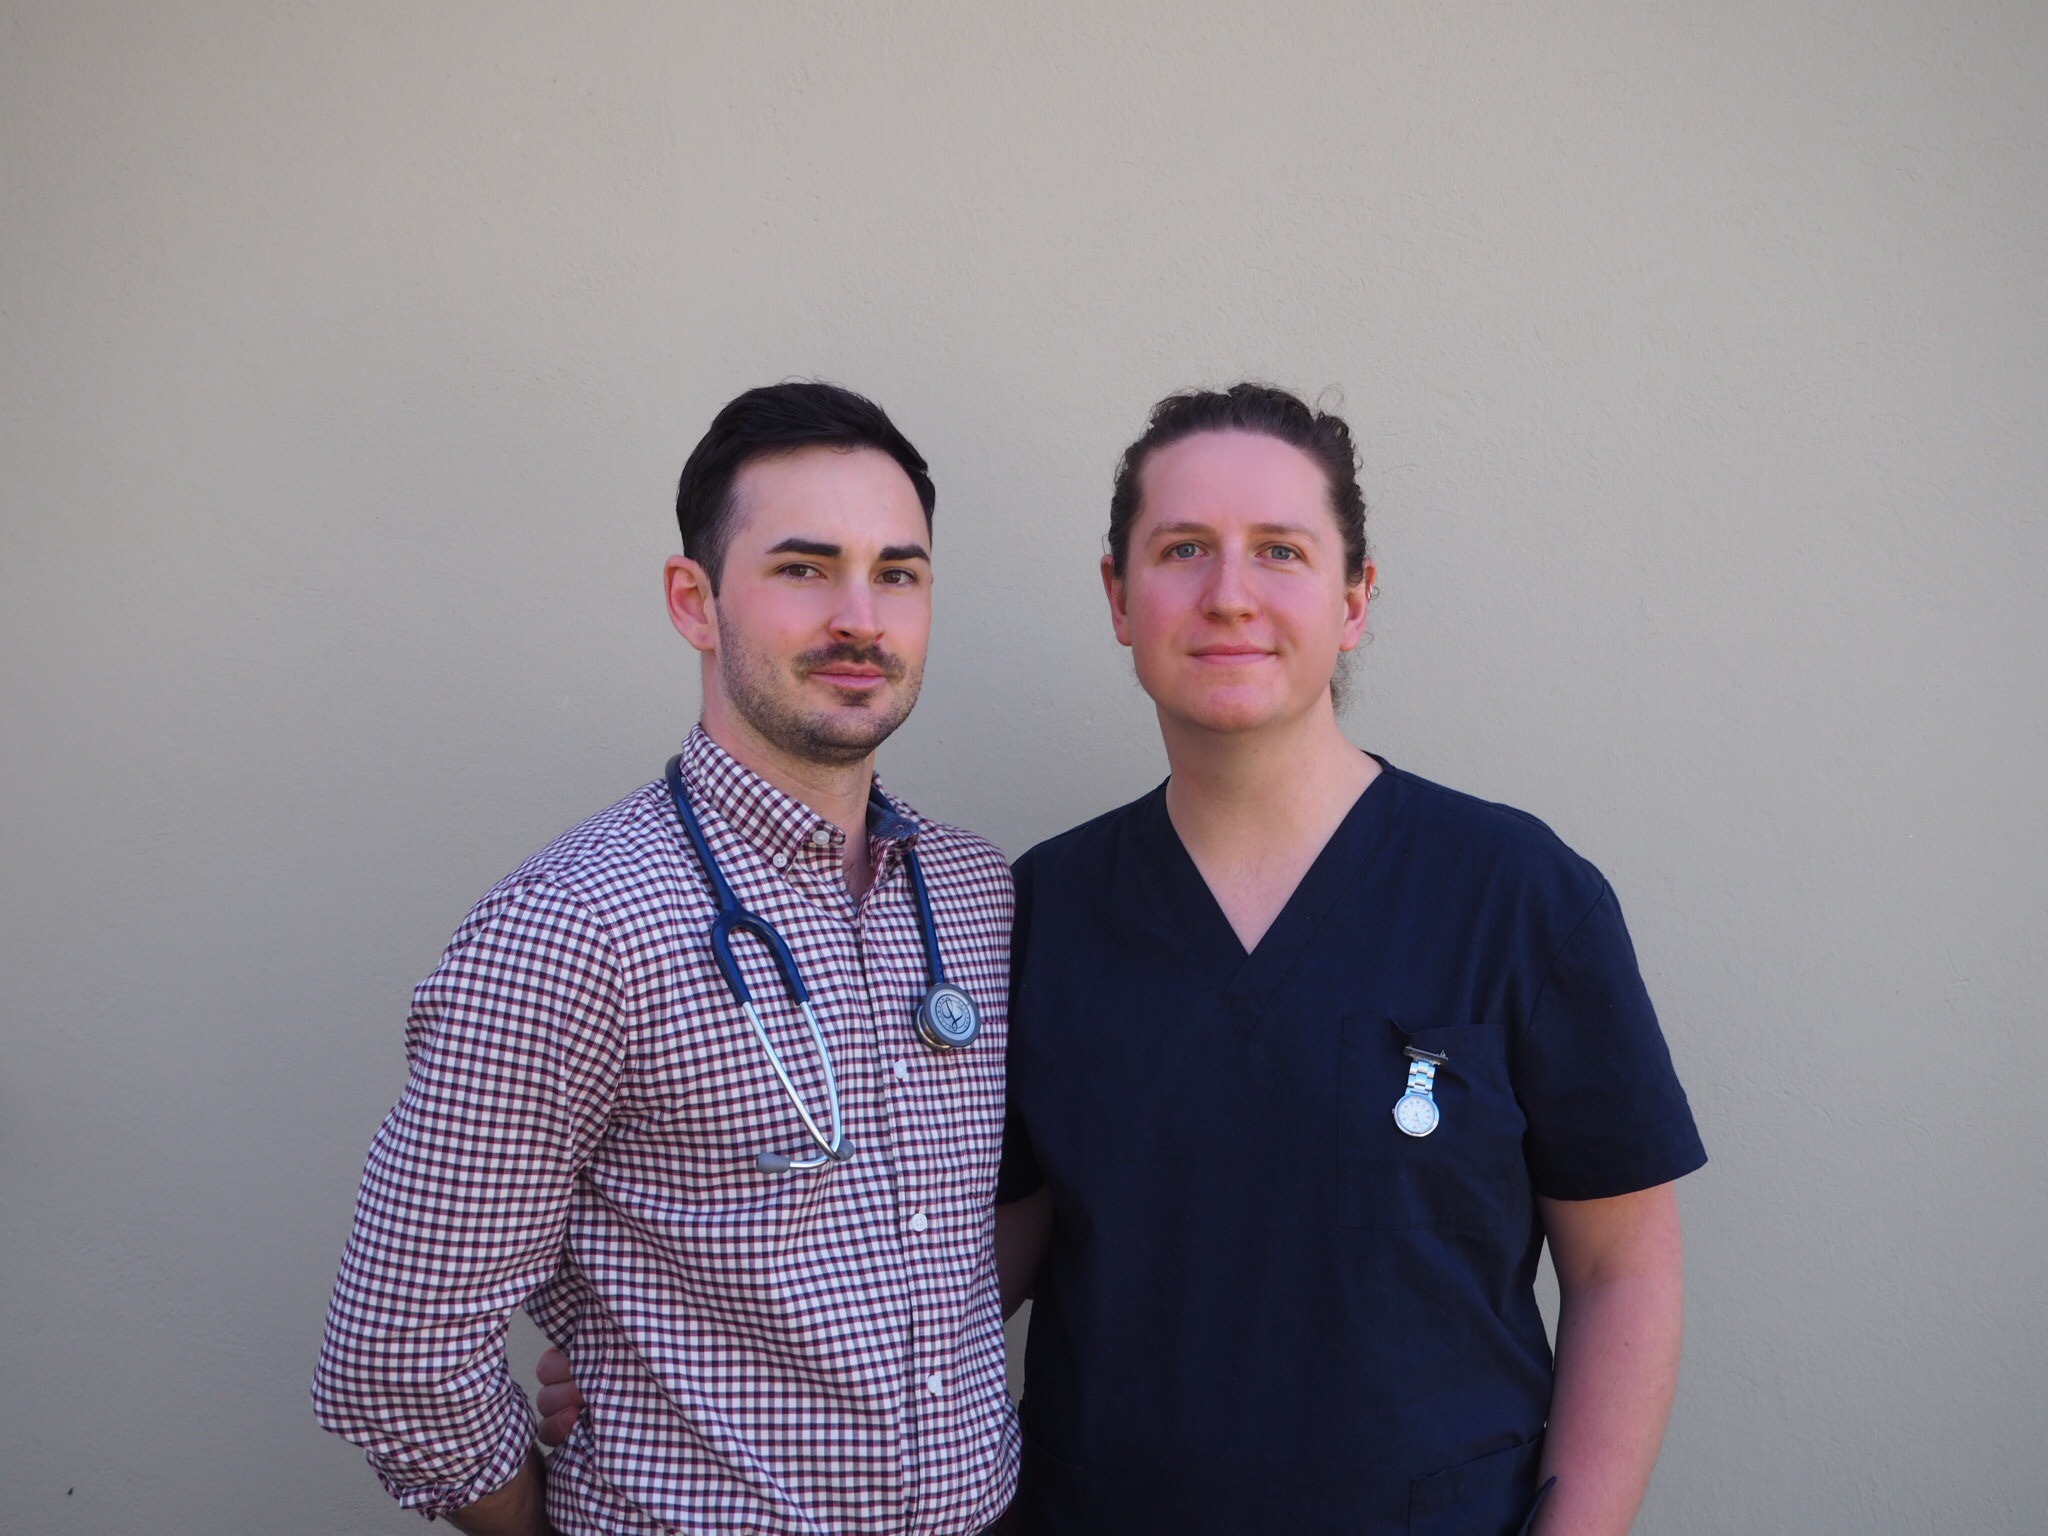 Medical Student and Nurse challenge shocking law stopping healthy gay men in Australia from giving blood donations to save lives